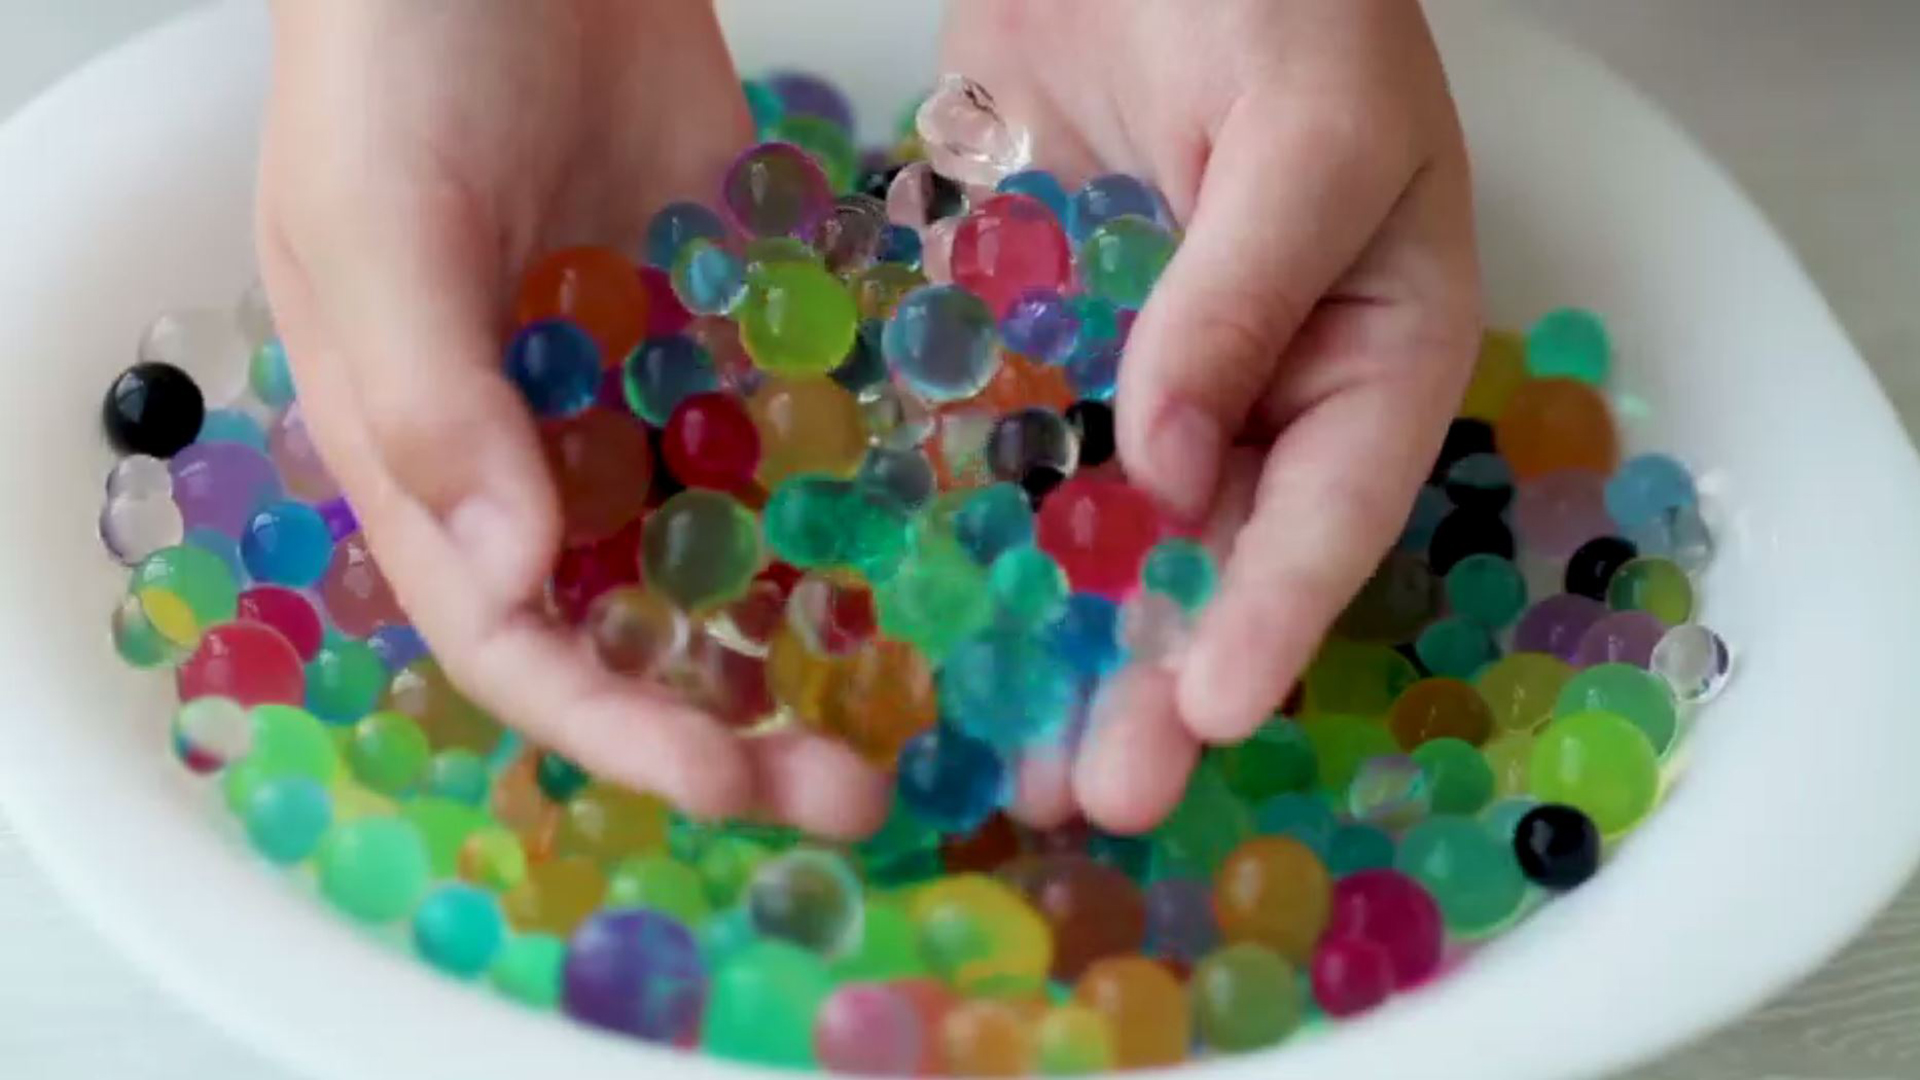 Tests reveal dangerous water beads are a toxic toy – NBC 5 Dallas